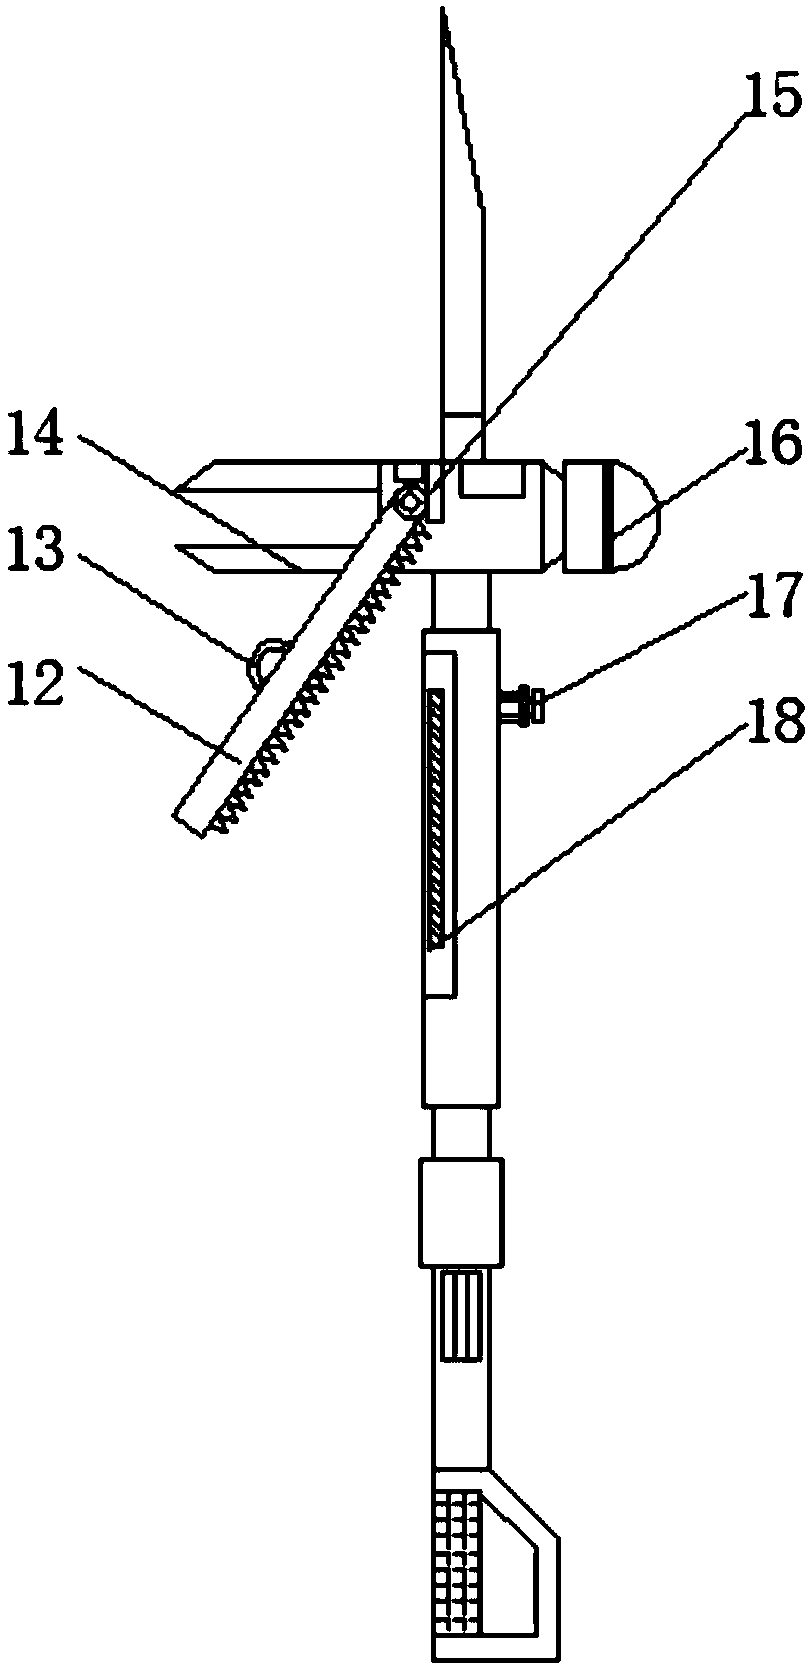 Multi-functional hammer used for construction engineering